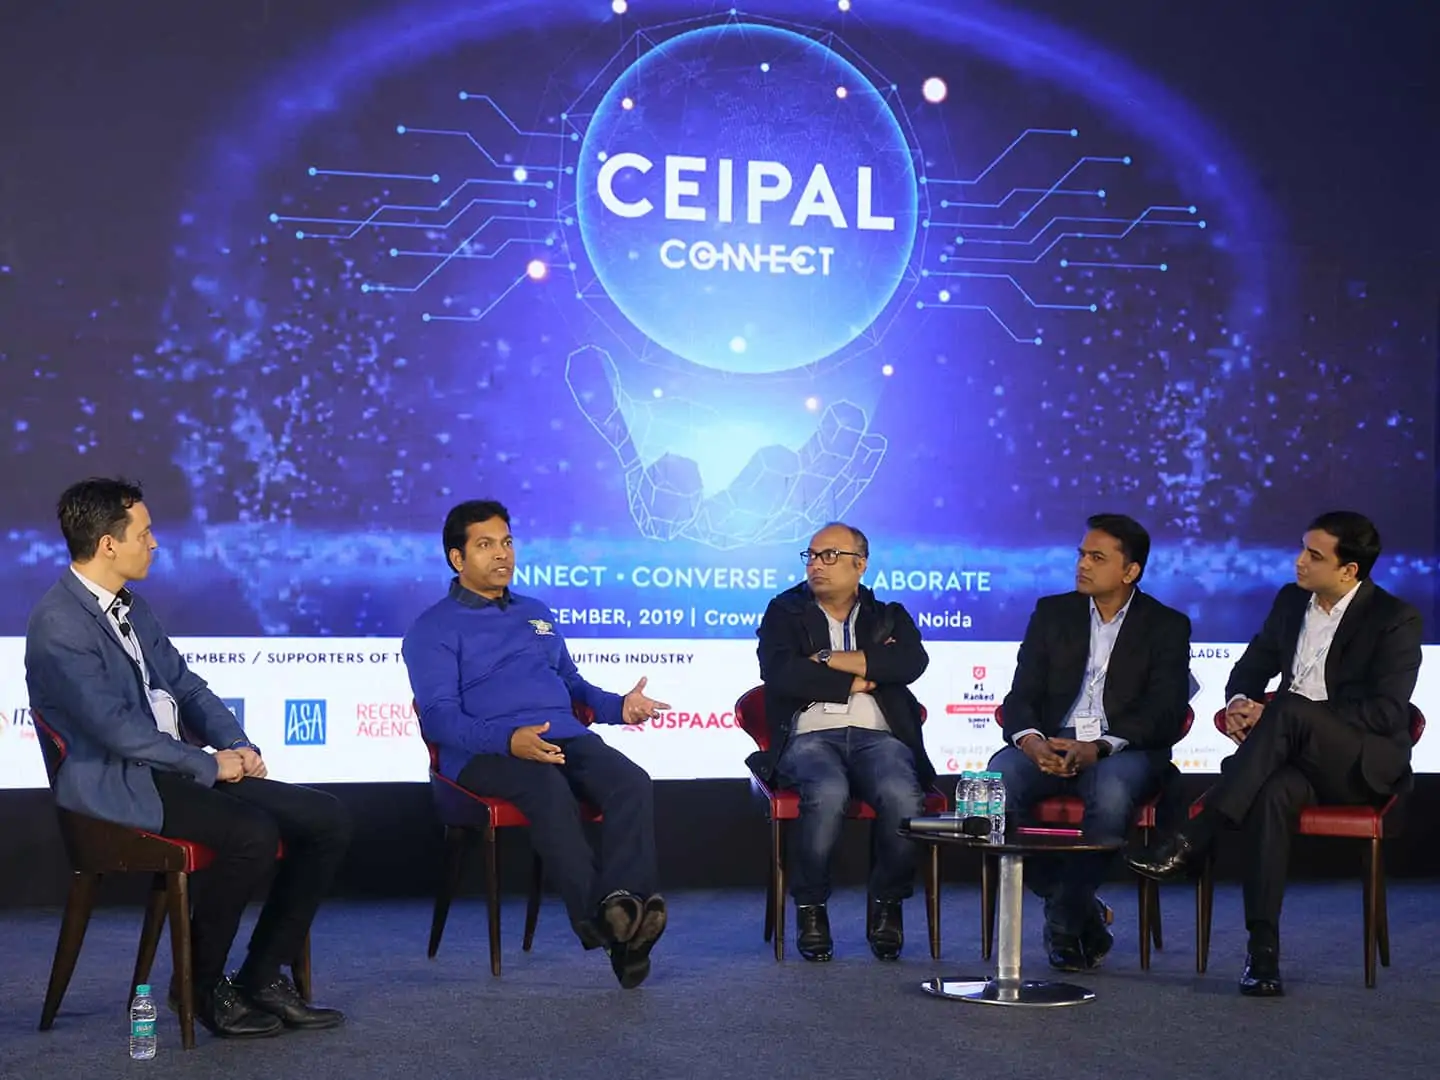 Ceipal Connect